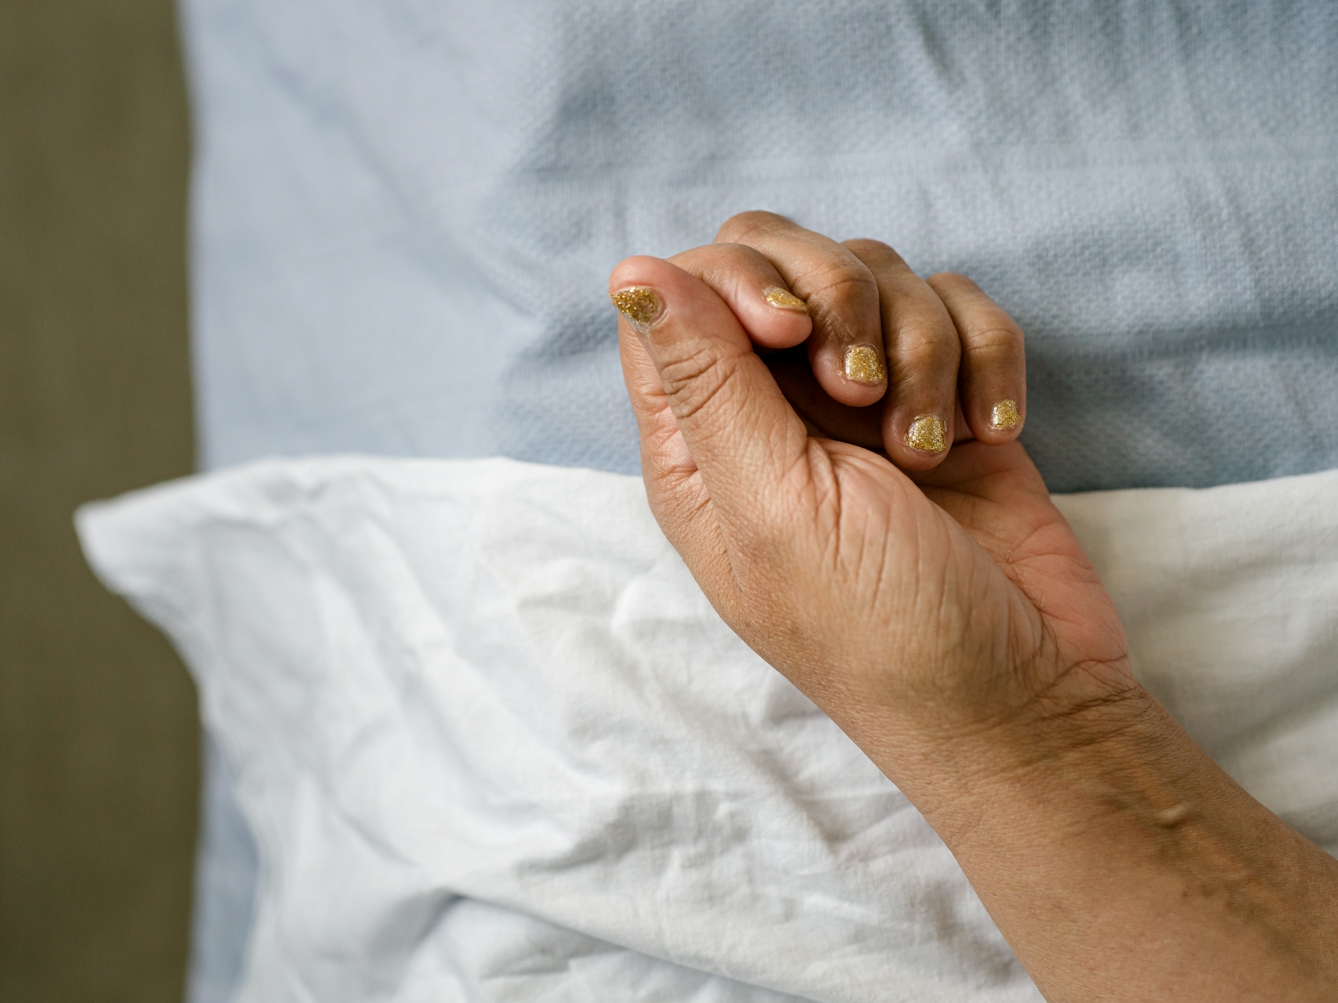 Photograph of the hand of a patient with gold glitter painted fingernails, resting on white and light blue hospital bedsheets.